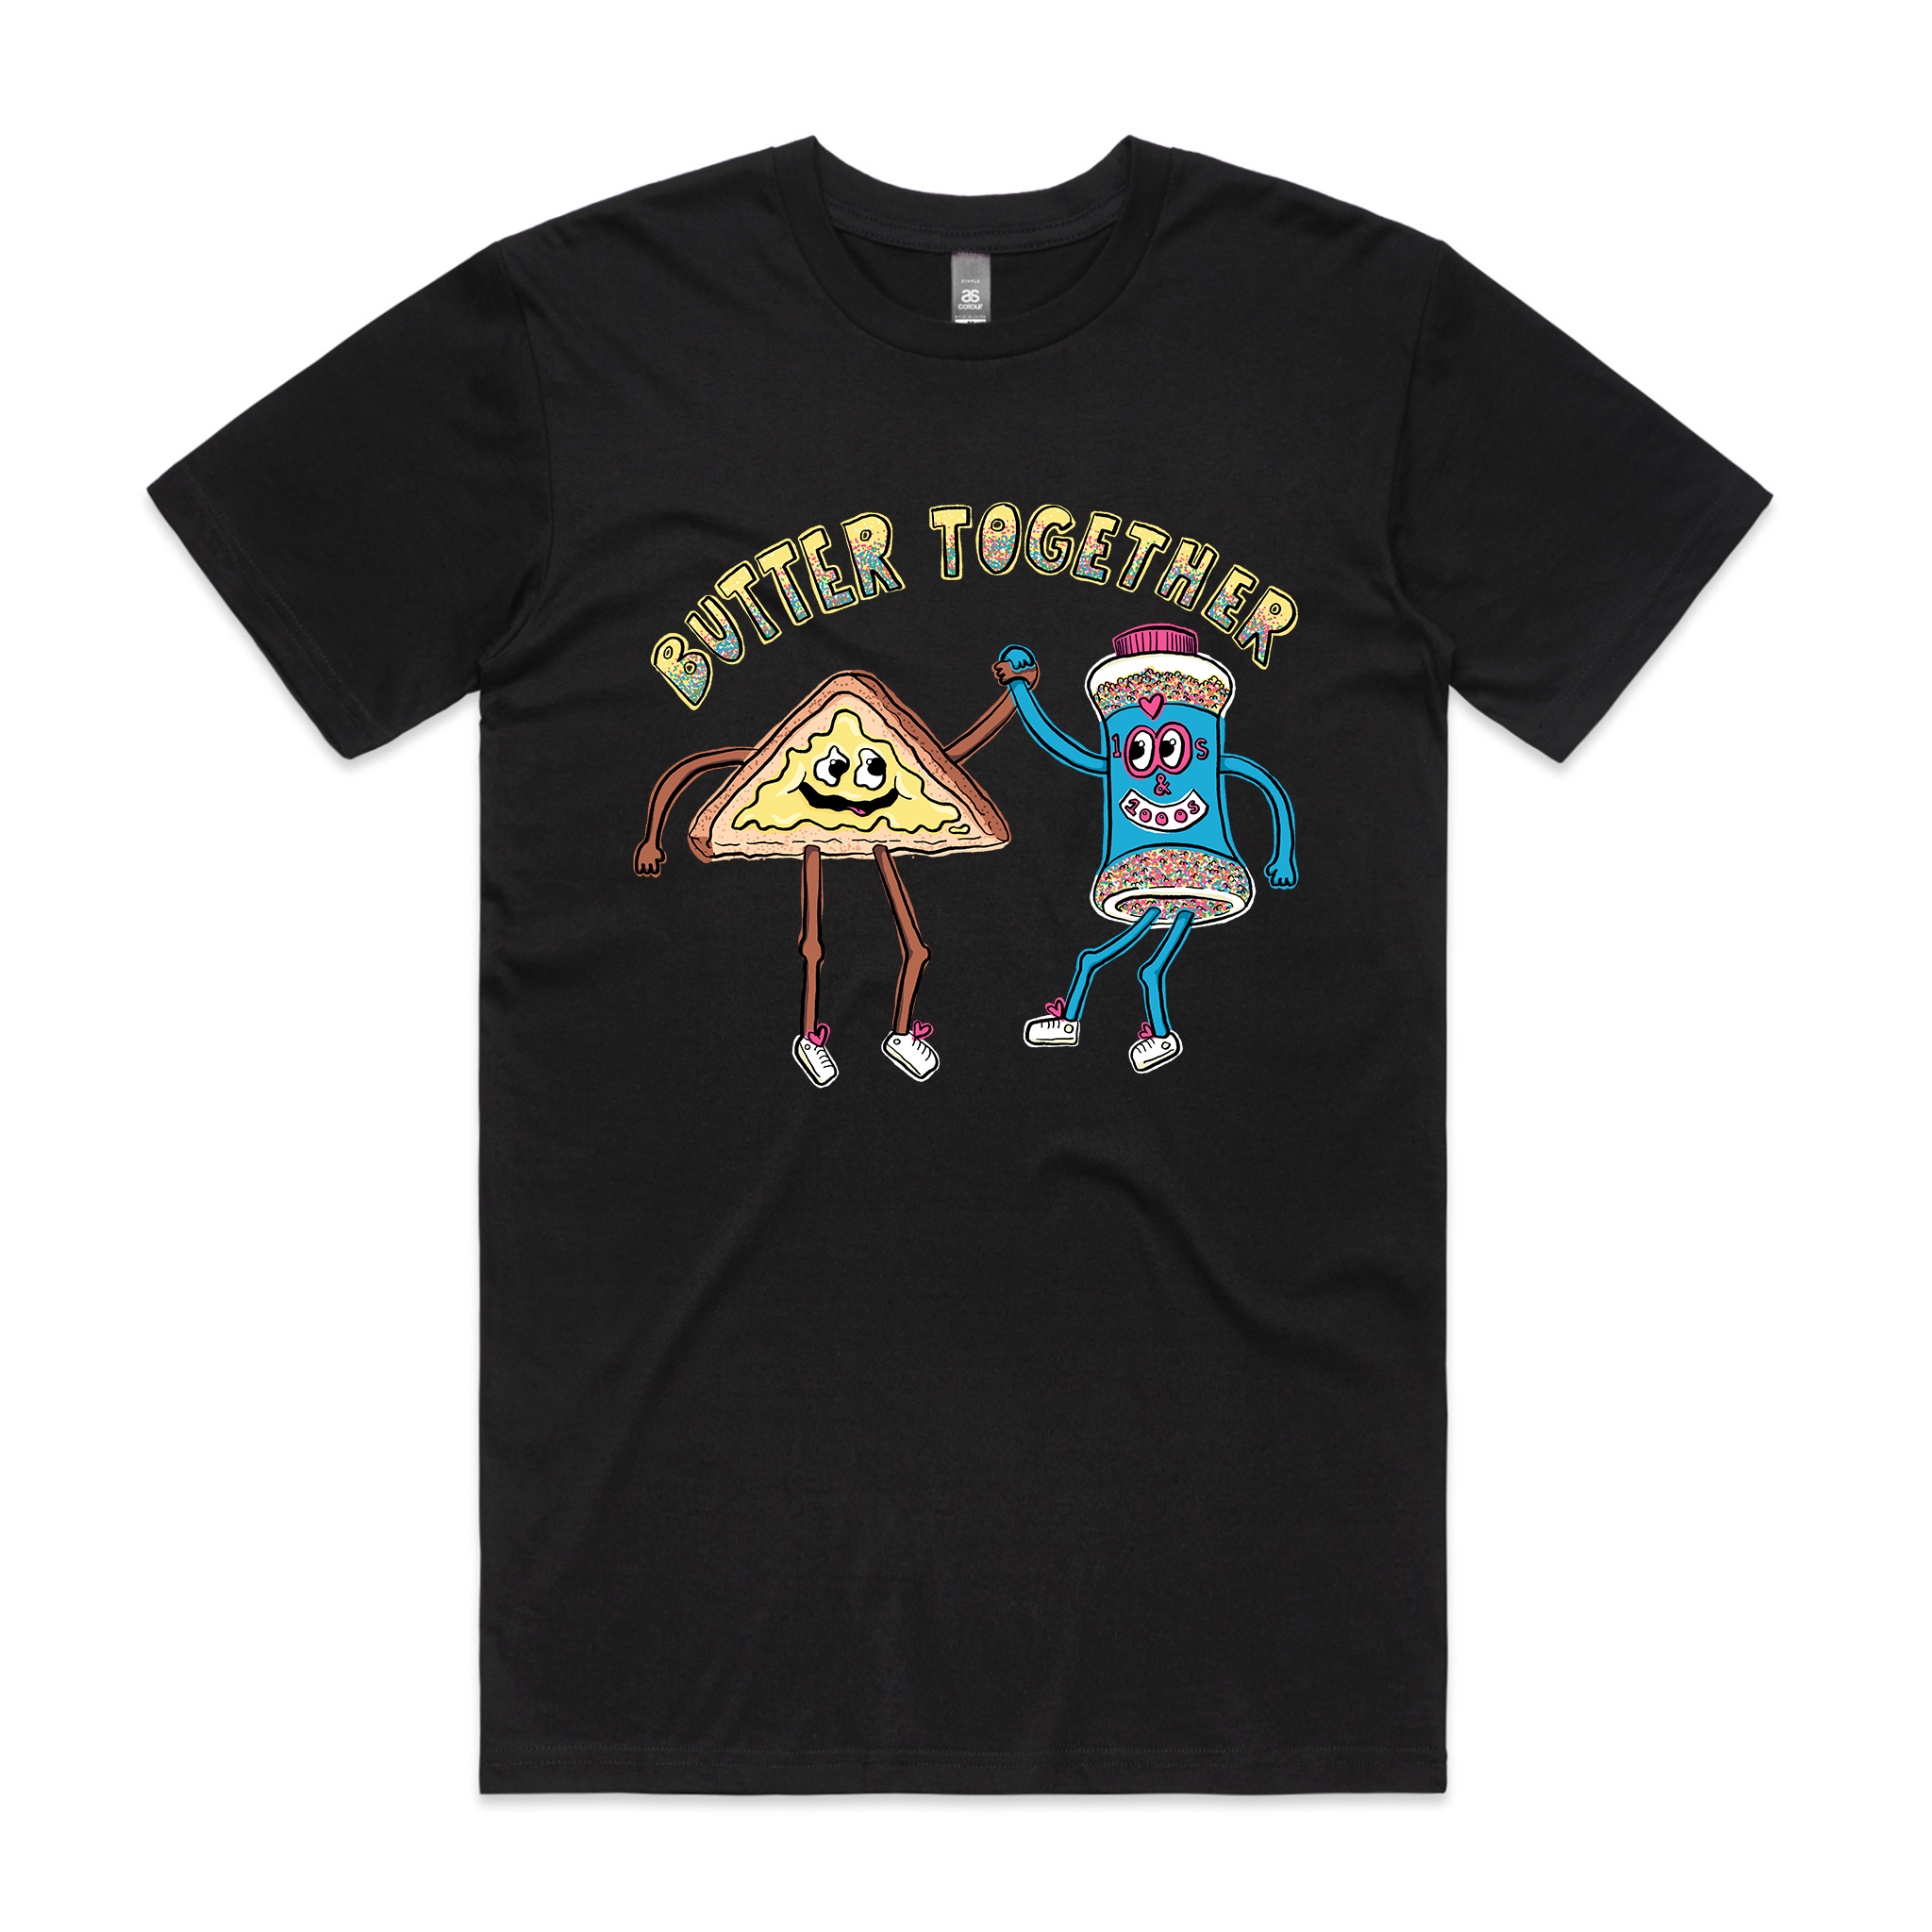 Butter Together Tee